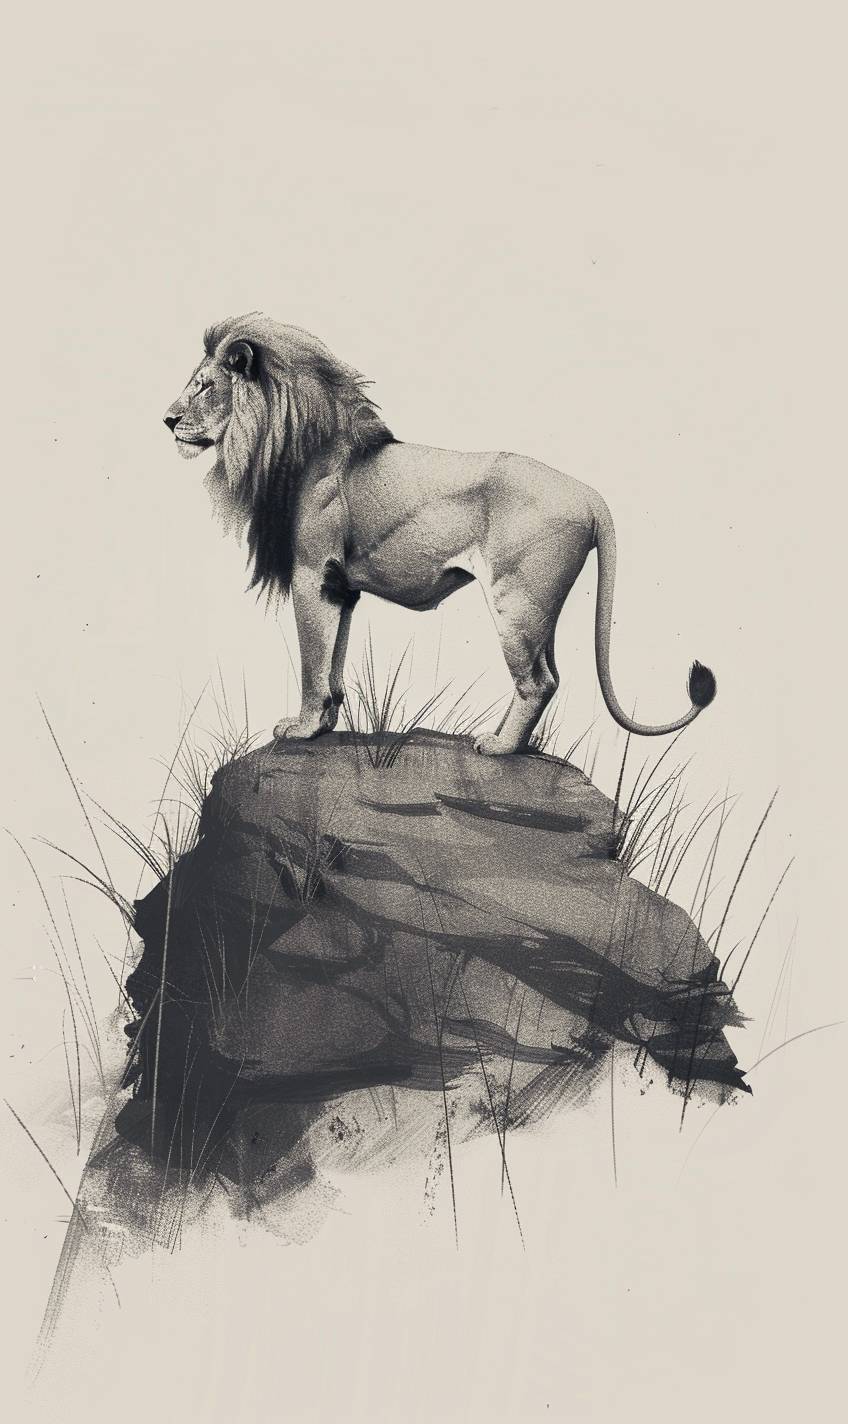 Majestic lion standing on a rocky outcrop, overlooking the savannah at sunrise, golden light casting long shadows, realistic fur details